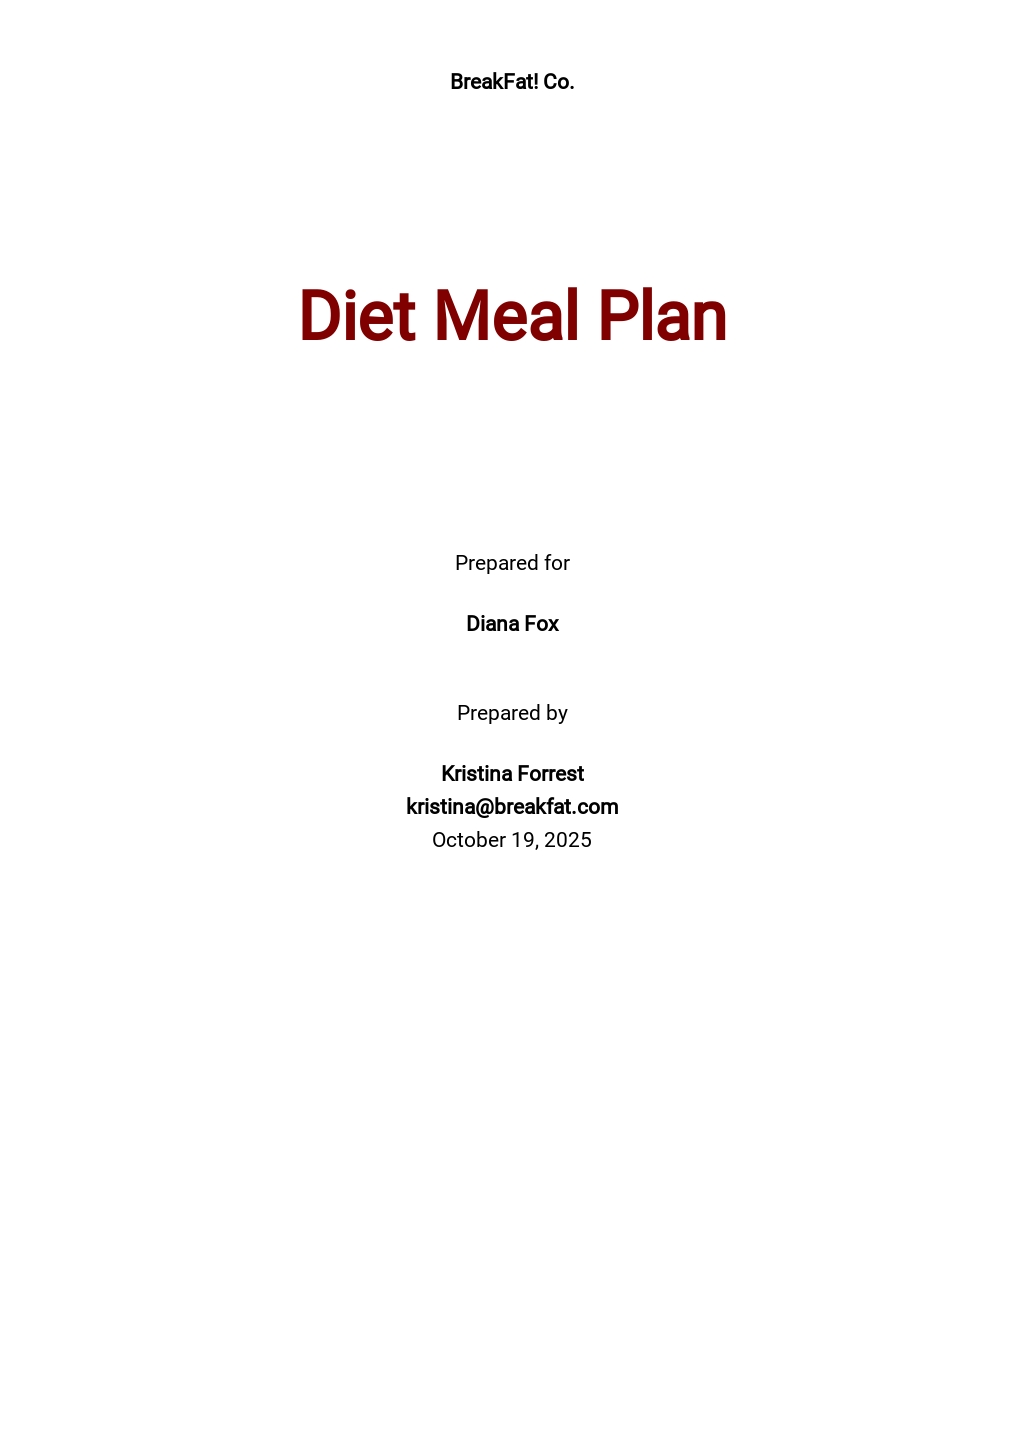 Free Diet Plan Templates, 11+ Download in PDF, Word, Pages, Google Docs ...